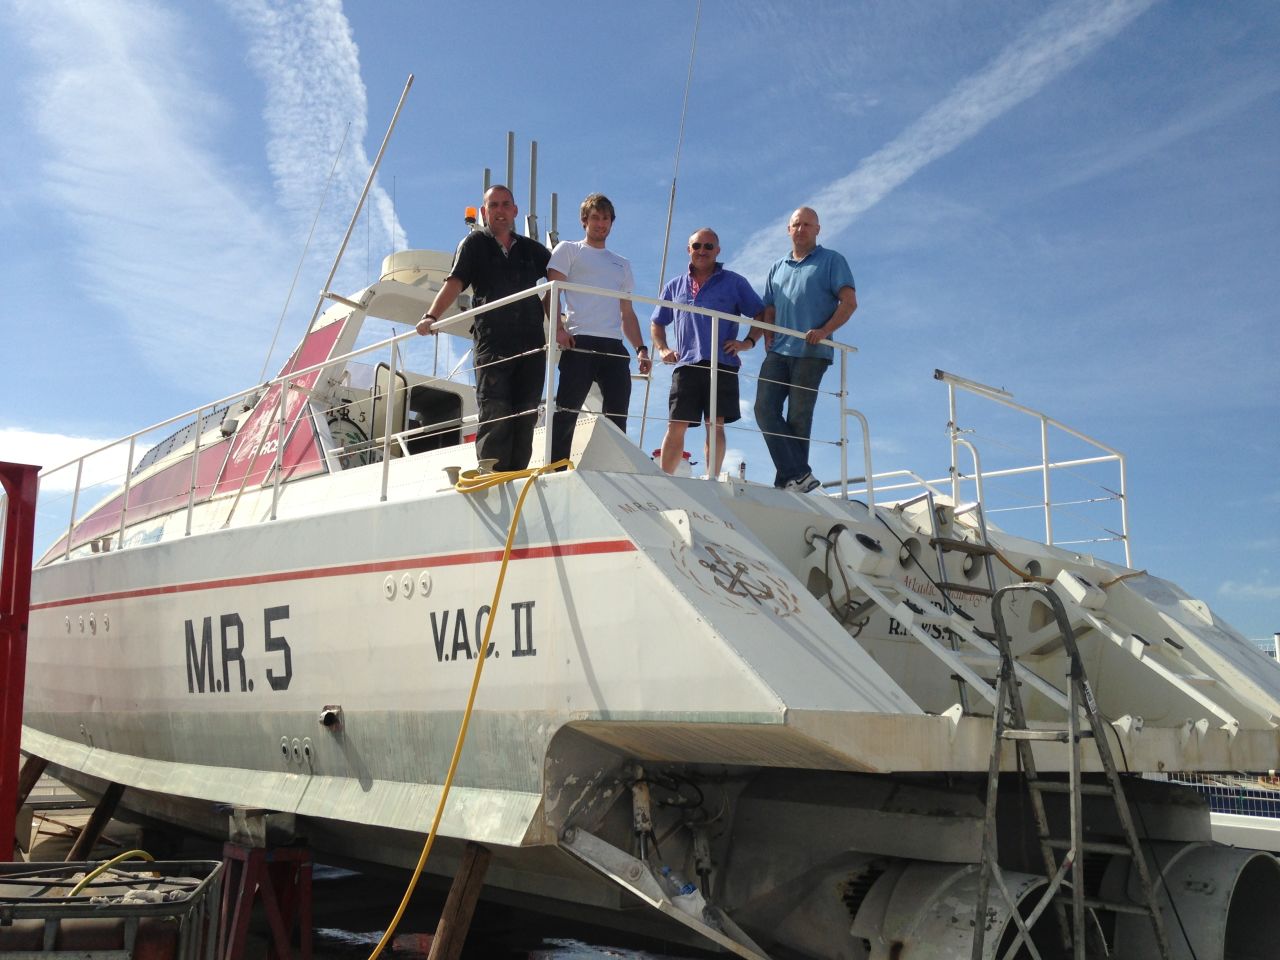 That was until British boat builder Dan Stevens (far right) got his hands on it. The former naval officer now plans to restore the historic vessel to her former glory, touring her across the UK.